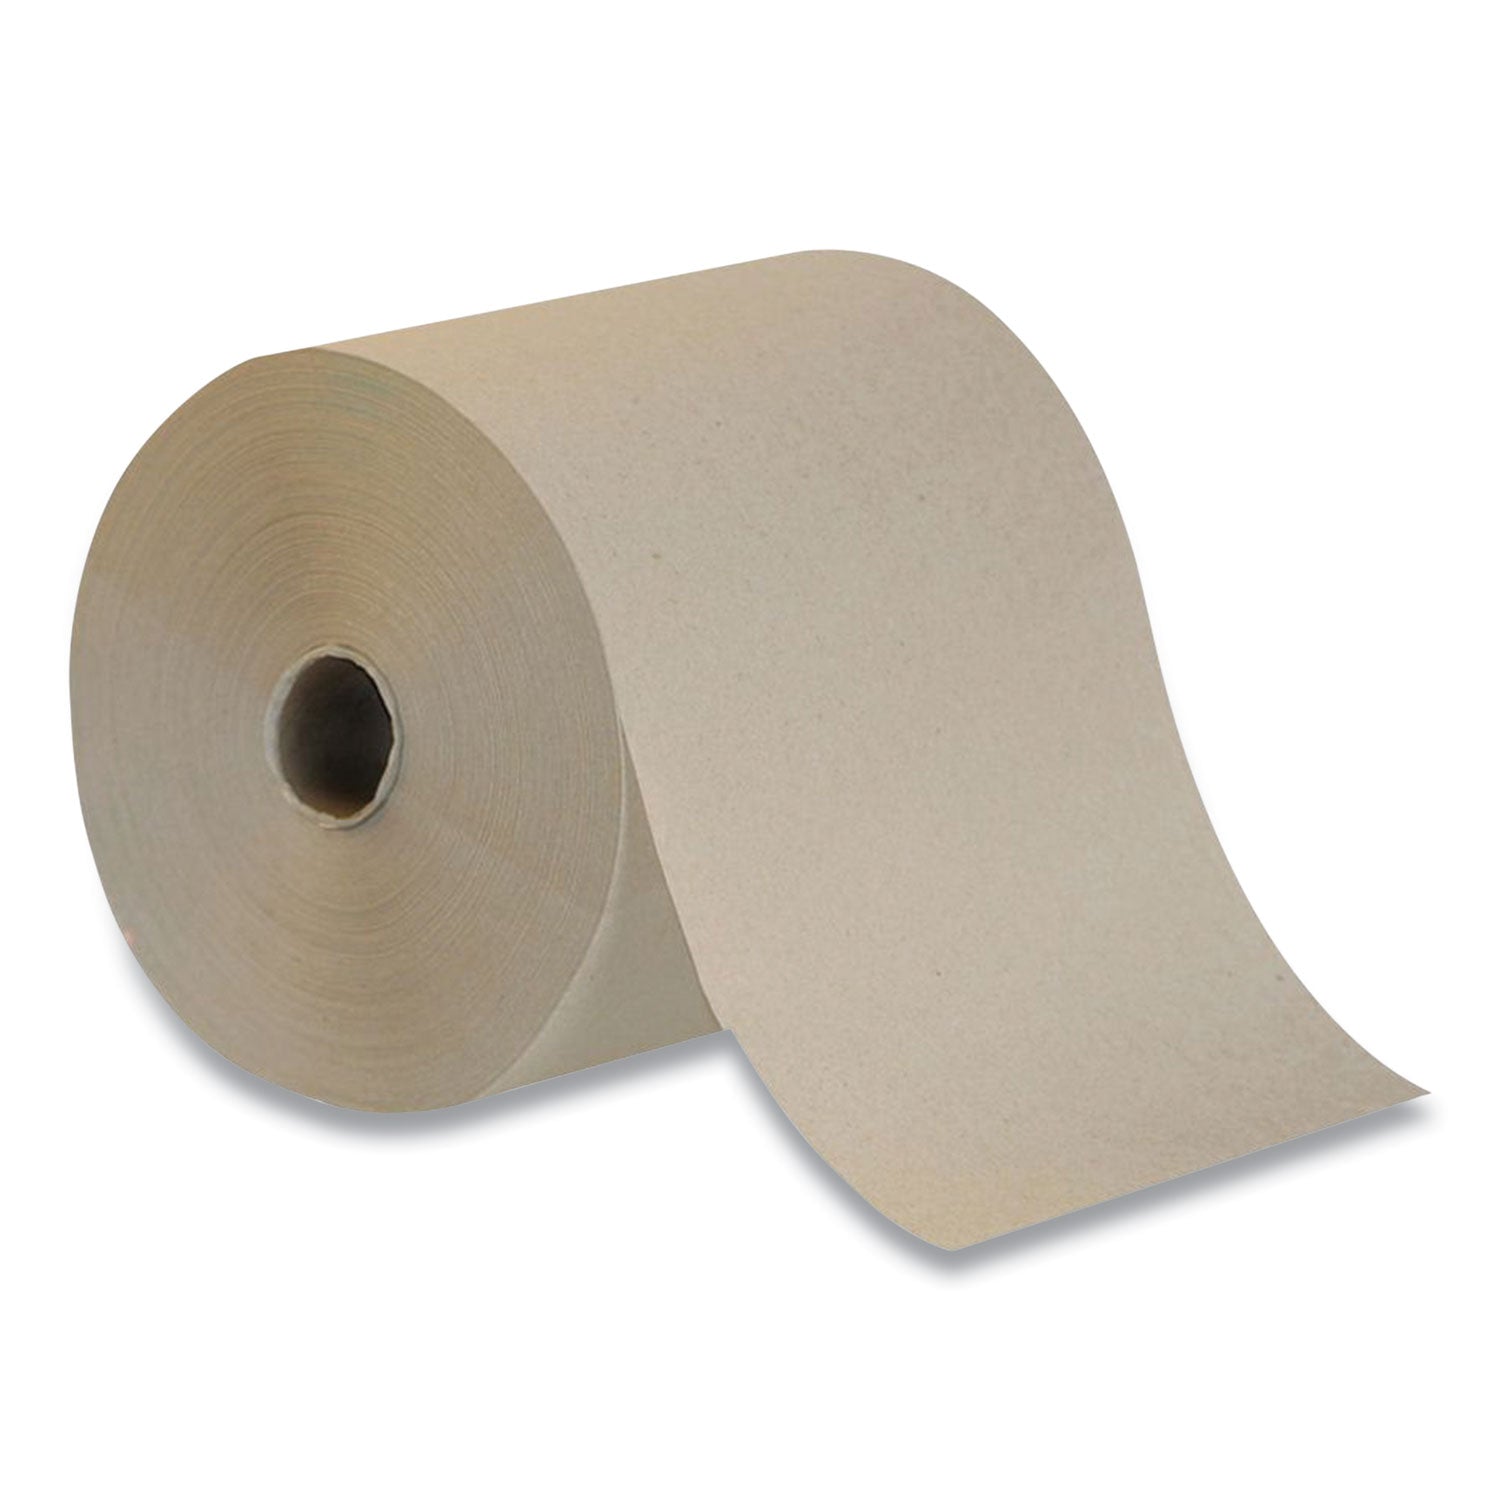 hardwound-paper-towels-1-ply-787-x-800-ft-natural-6-rolls-carton_cwz365375 - 1